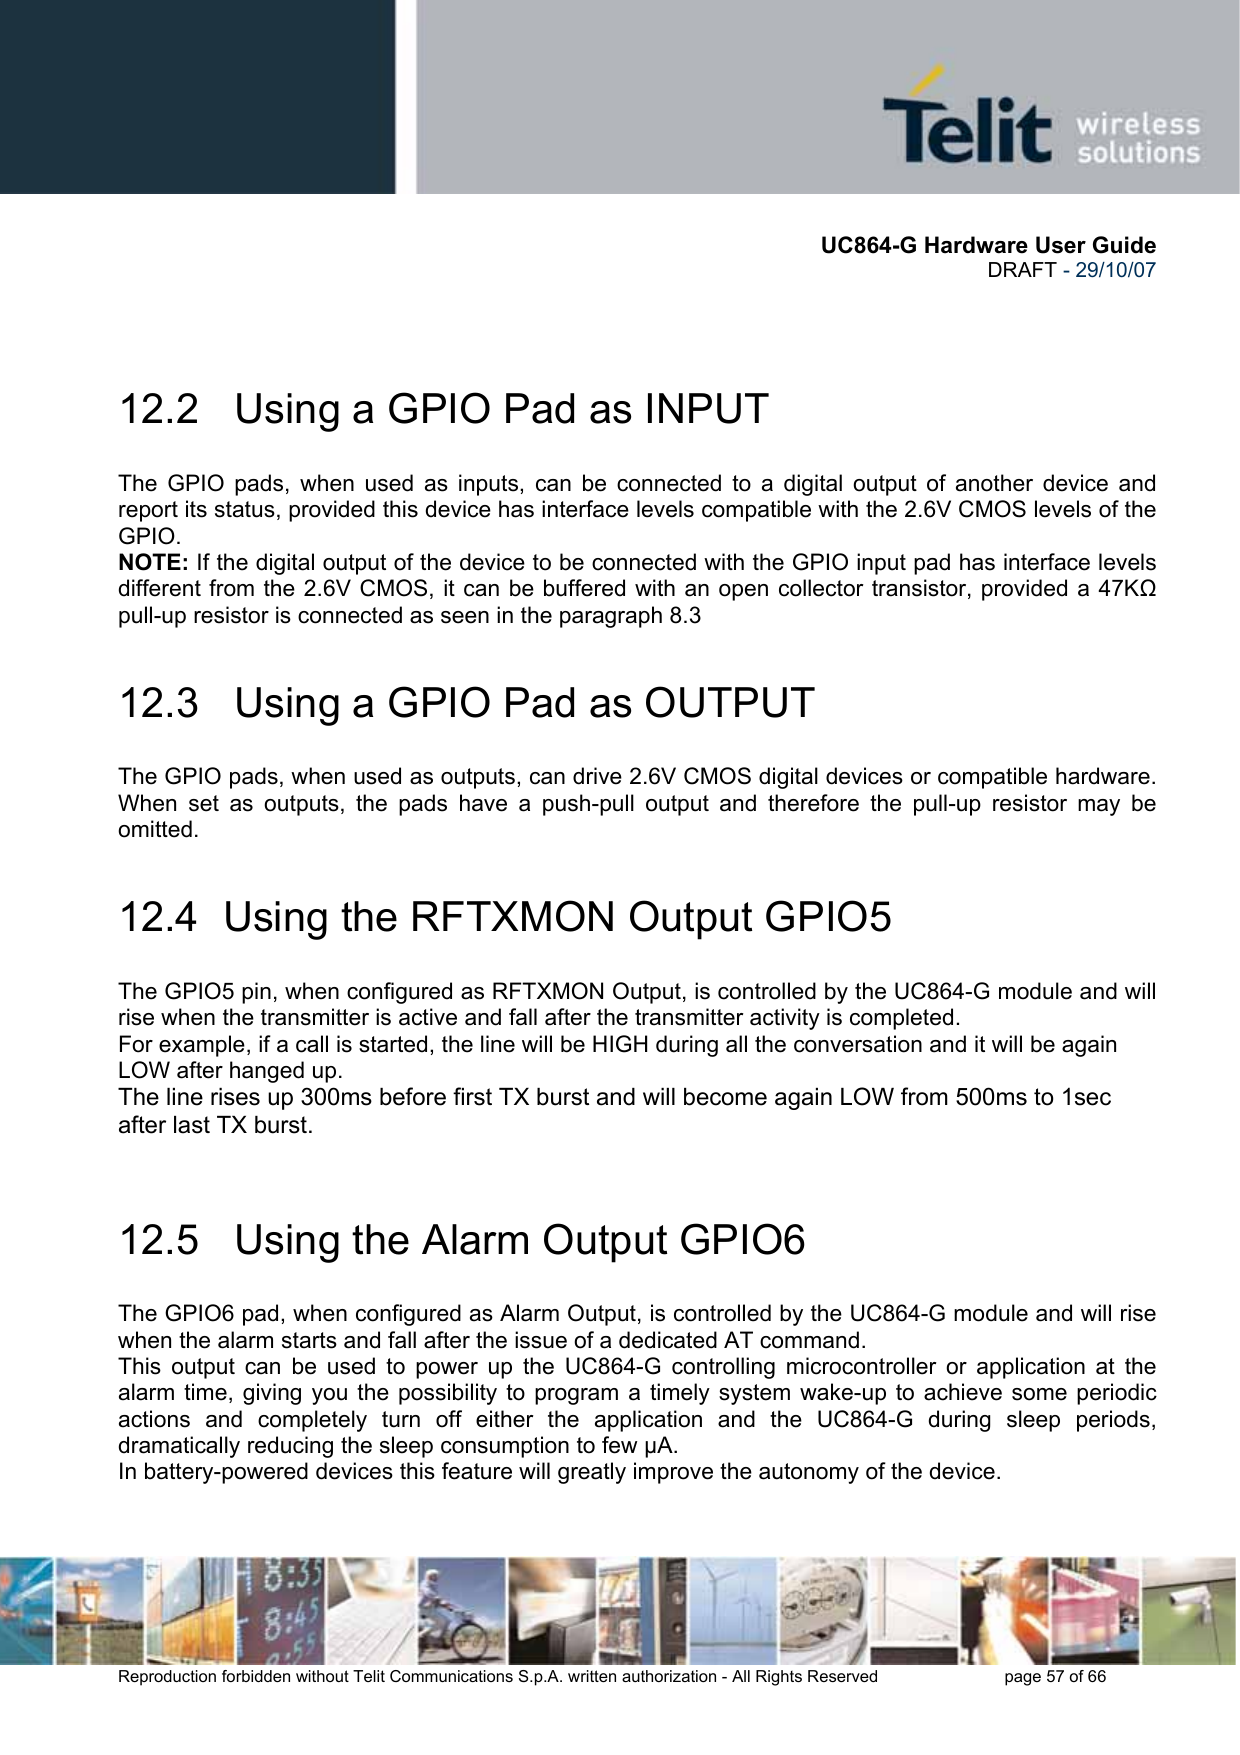       UC864-G Hardware User Guide  DRAFT - 29/10/07      Reproduction forbidden without Telit Communications S.p.A. written authorization - All Rights Reserved    page 57 of 66    12.2   Using a GPIO Pad as INPUT The GPIO pads, when used as inputs, can be connected to a digital output of another device and report its status, provided this device has interface levels compatible with the 2.6V CMOS levels of the GPIO.  NOTE: If the digital output of the device to be connected with the GPIO input pad has interface levels different from the 2.6V CMOS, it can be buffered with an open collector transistor, provided a 47KΩ pull-up resistor is connected as seen in the paragraph 8.3 12.3   Using a GPIO Pad as OUTPUT The GPIO pads, when used as outputs, can drive 2.6V CMOS digital devices or compatible hardware. When set as outputs, the pads have a push-pull output and therefore the pull-up resistor may be omitted. 12.4  Using the RFTXMON Output GPIO5 The GPIO5 pin, when configured as RFTXMON Output, is controlled by the UC864-G module and will rise when the transmitter is active and fall after the transmitter activity is completed. For example, if a call is started, the line will be HIGH during all the conversation and it will be again LOW after hanged up. The line rises up 300ms before first TX burst and will become again LOW from 500ms to 1sec after last TX burst.  12.5   Using the Alarm Output GPIO6 The GPIO6 pad, when configured as Alarm Output, is controlled by the UC864-G module and will rise when the alarm starts and fall after the issue of a dedicated AT command. This output can be used to power up the UC864-G controlling microcontroller or application at the alarm time, giving you the possibility to program a timely system wake-up to achieve some periodic actions and completely turn off either the application and the UC864-G during sleep periods, dramatically reducing the sleep consumption to few µA. In battery-powered devices this feature will greatly improve the autonomy of the device.   